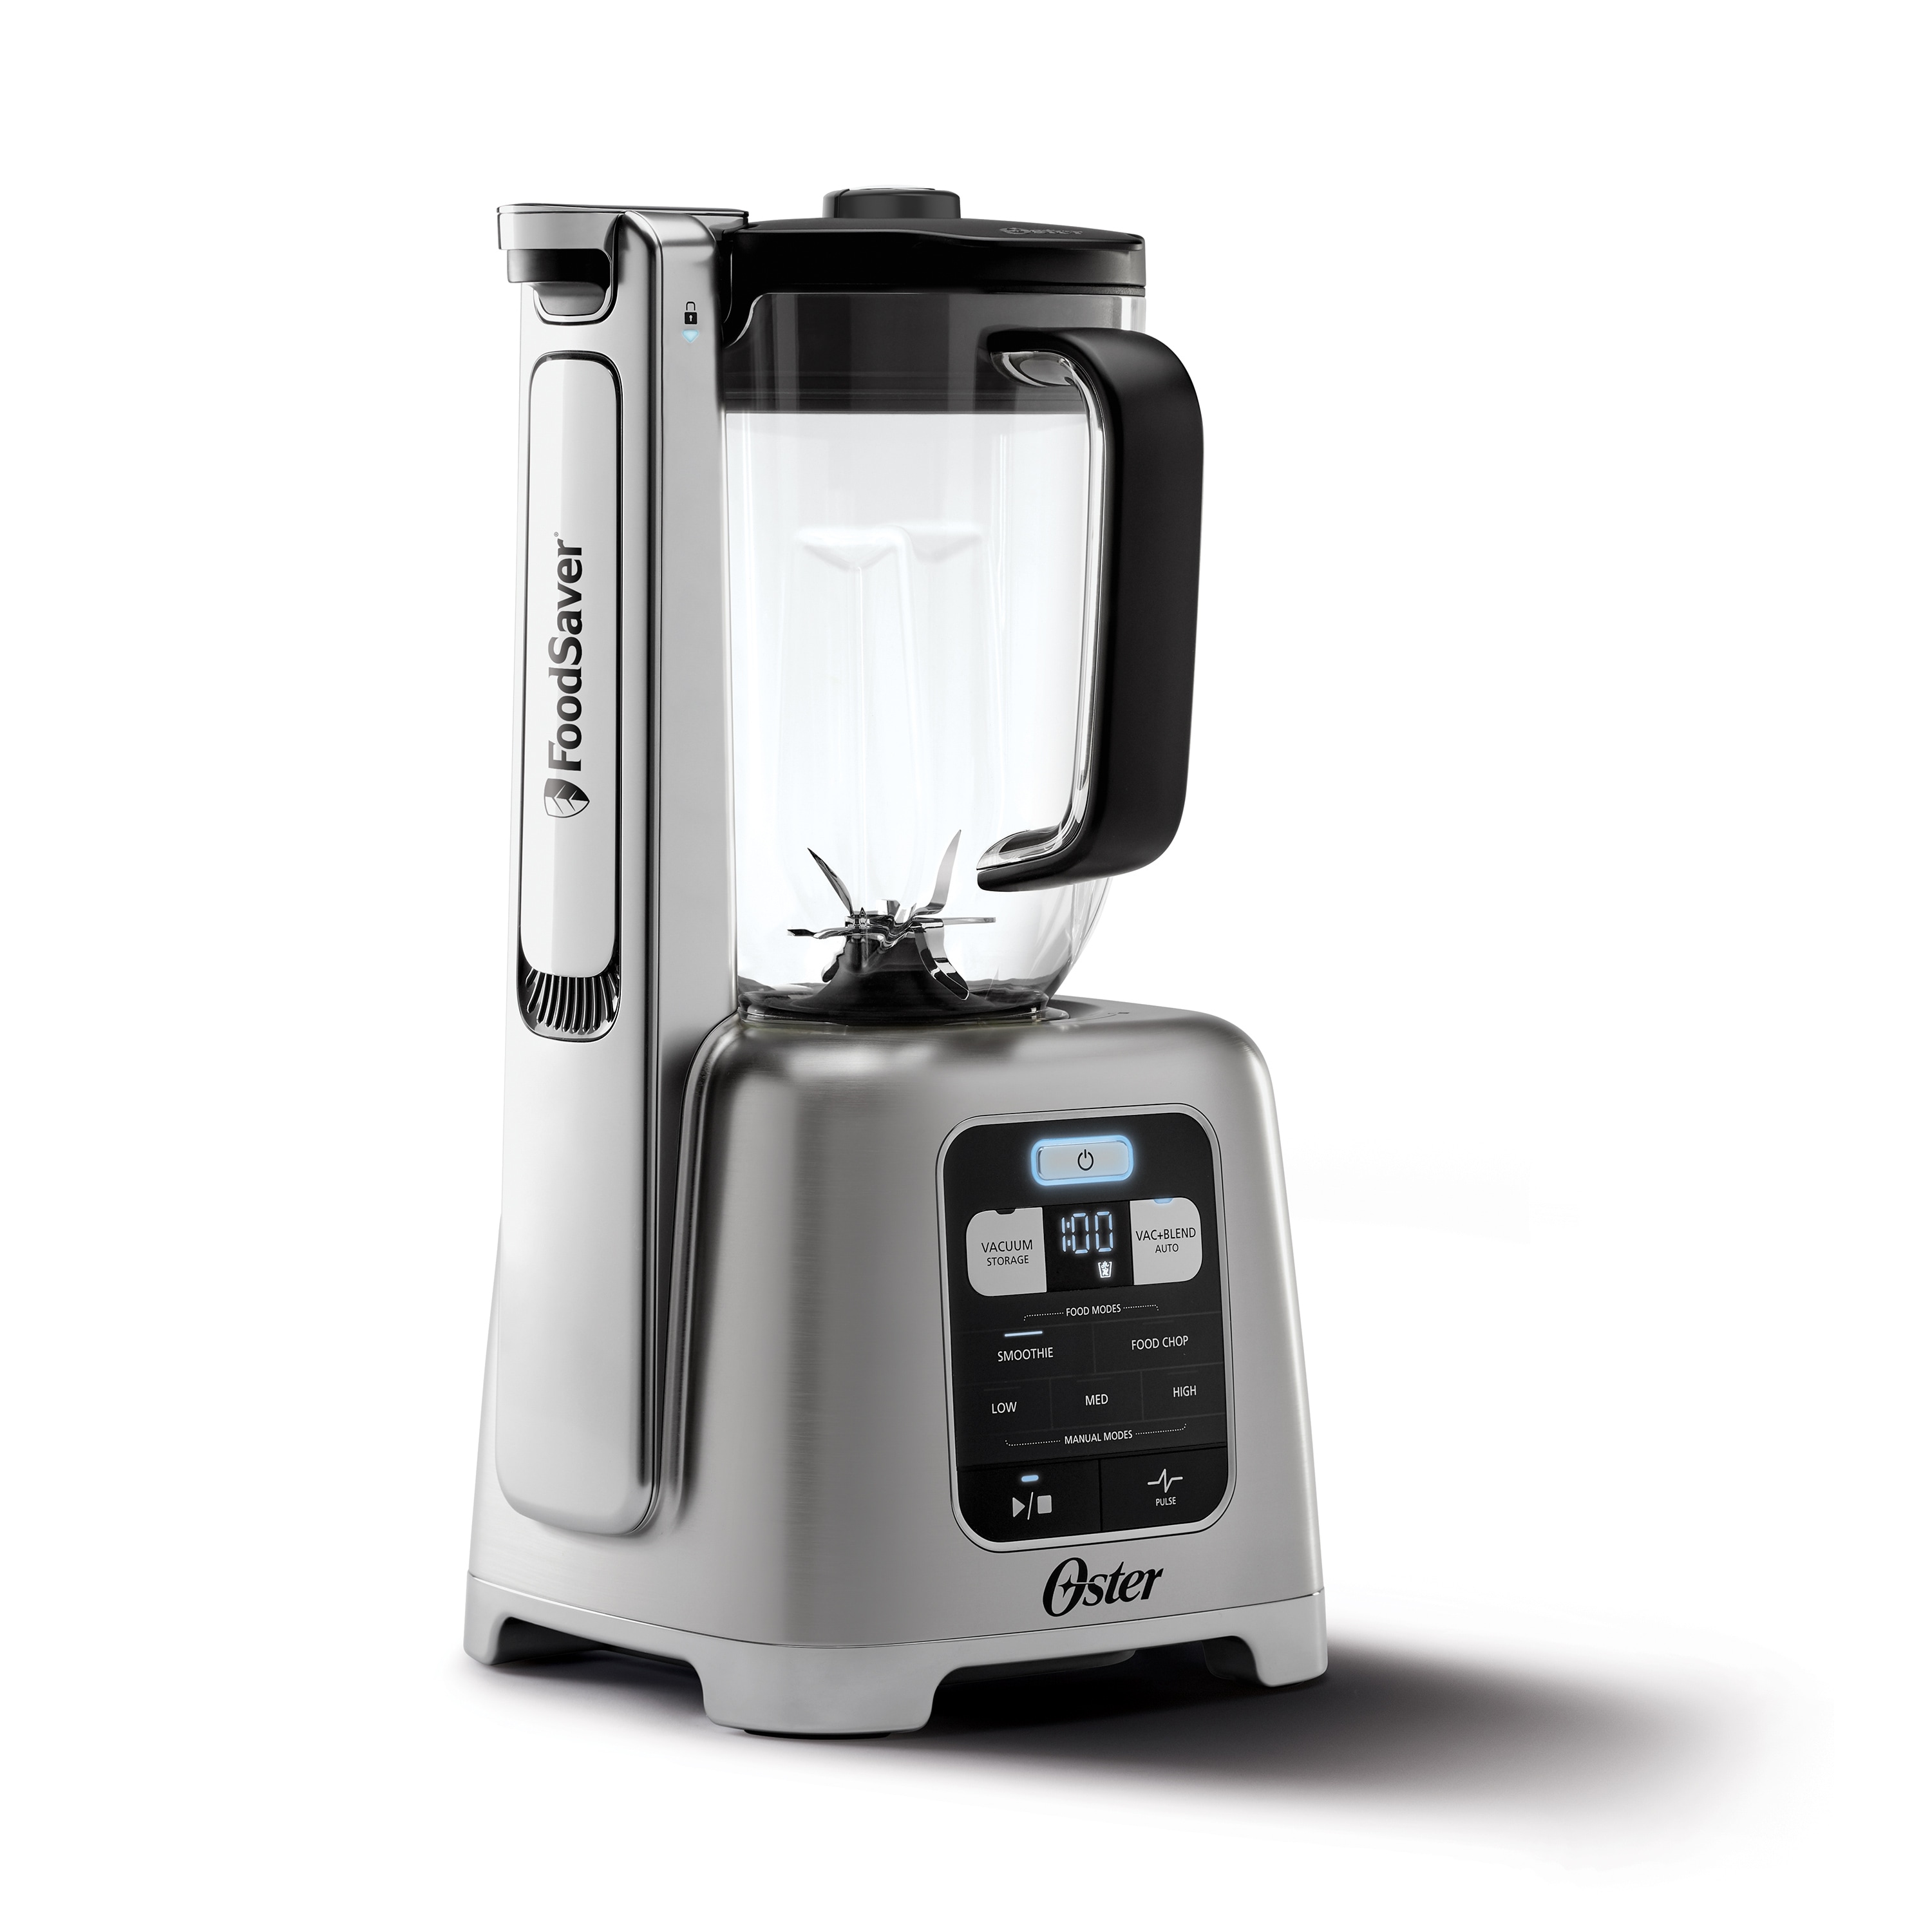 https://ak1.ostkcdn.com/images/products/is/images/direct/0befa3e388e51e162430271d9109795ad9d7c189/Oster%C2%AE-Performance-Blender-with-FoodSaver-Vacuum-Sealing-System%2C-Brushed-Nickel.jpg